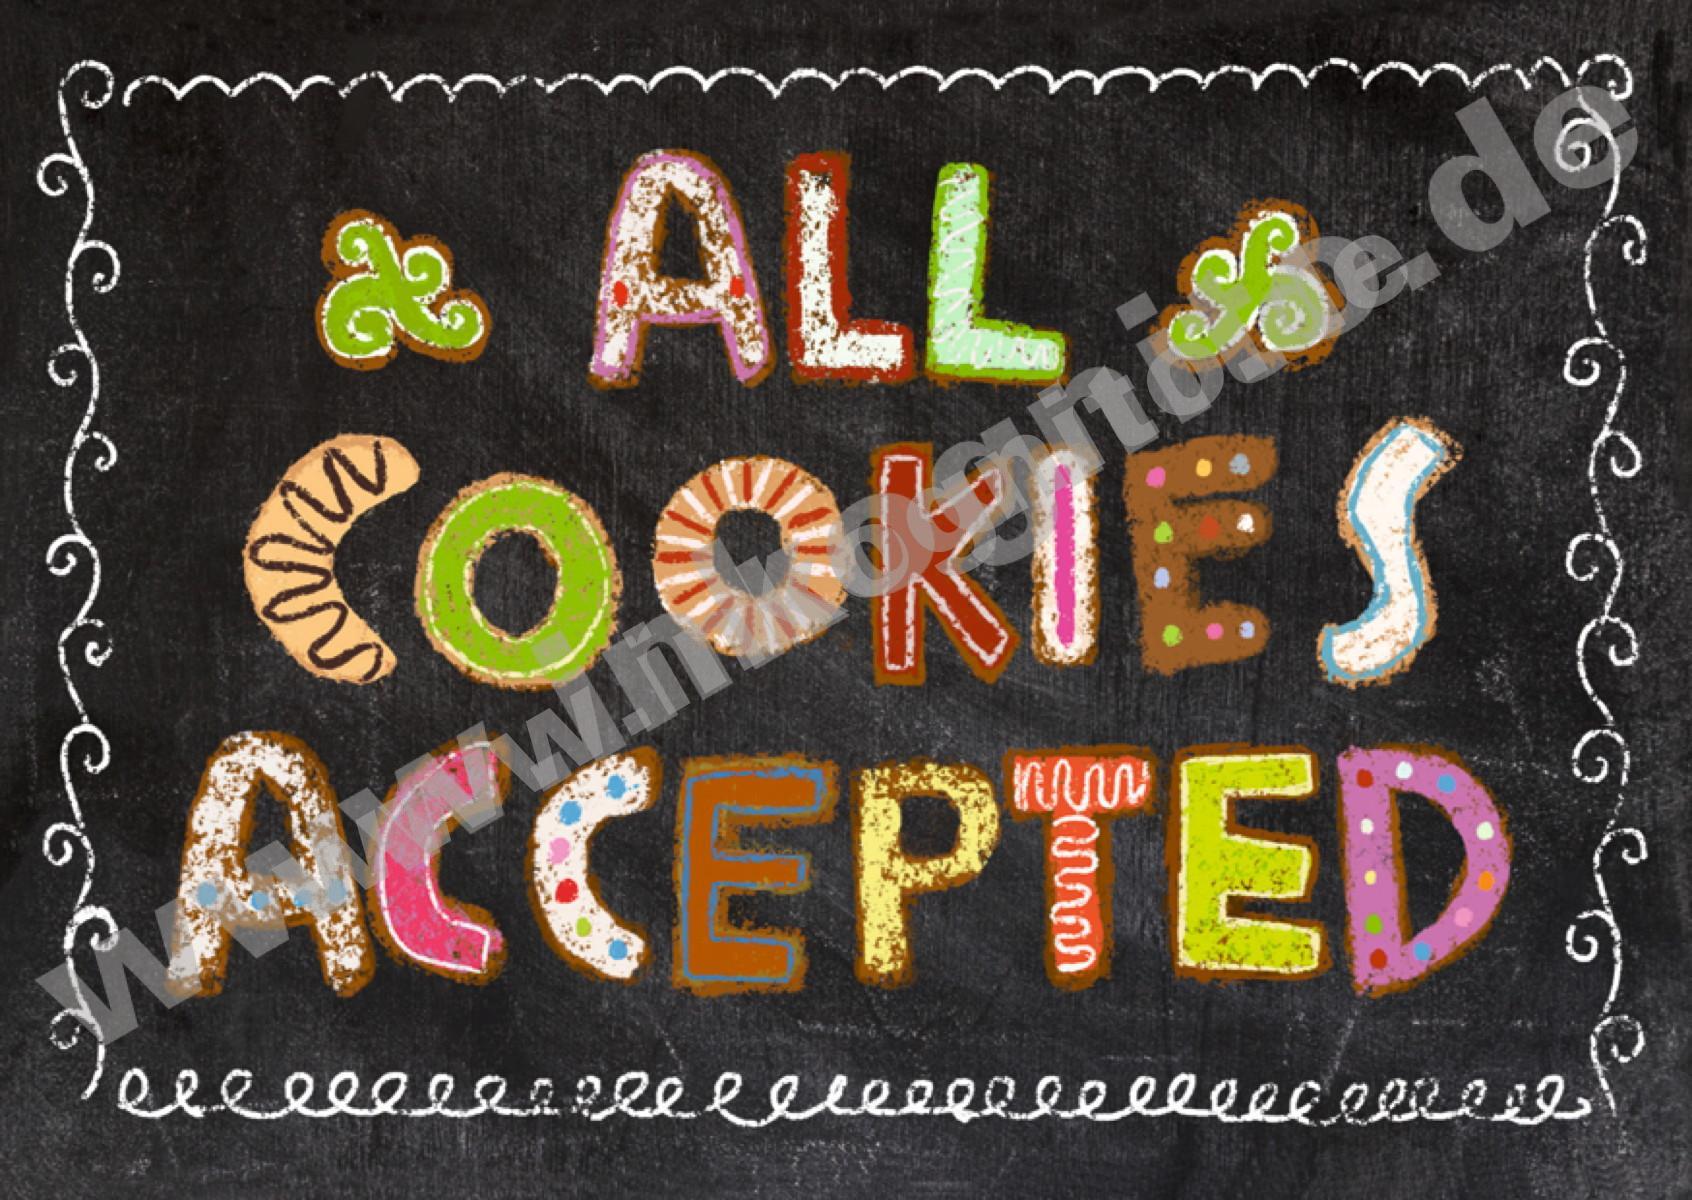 All cookies accepted